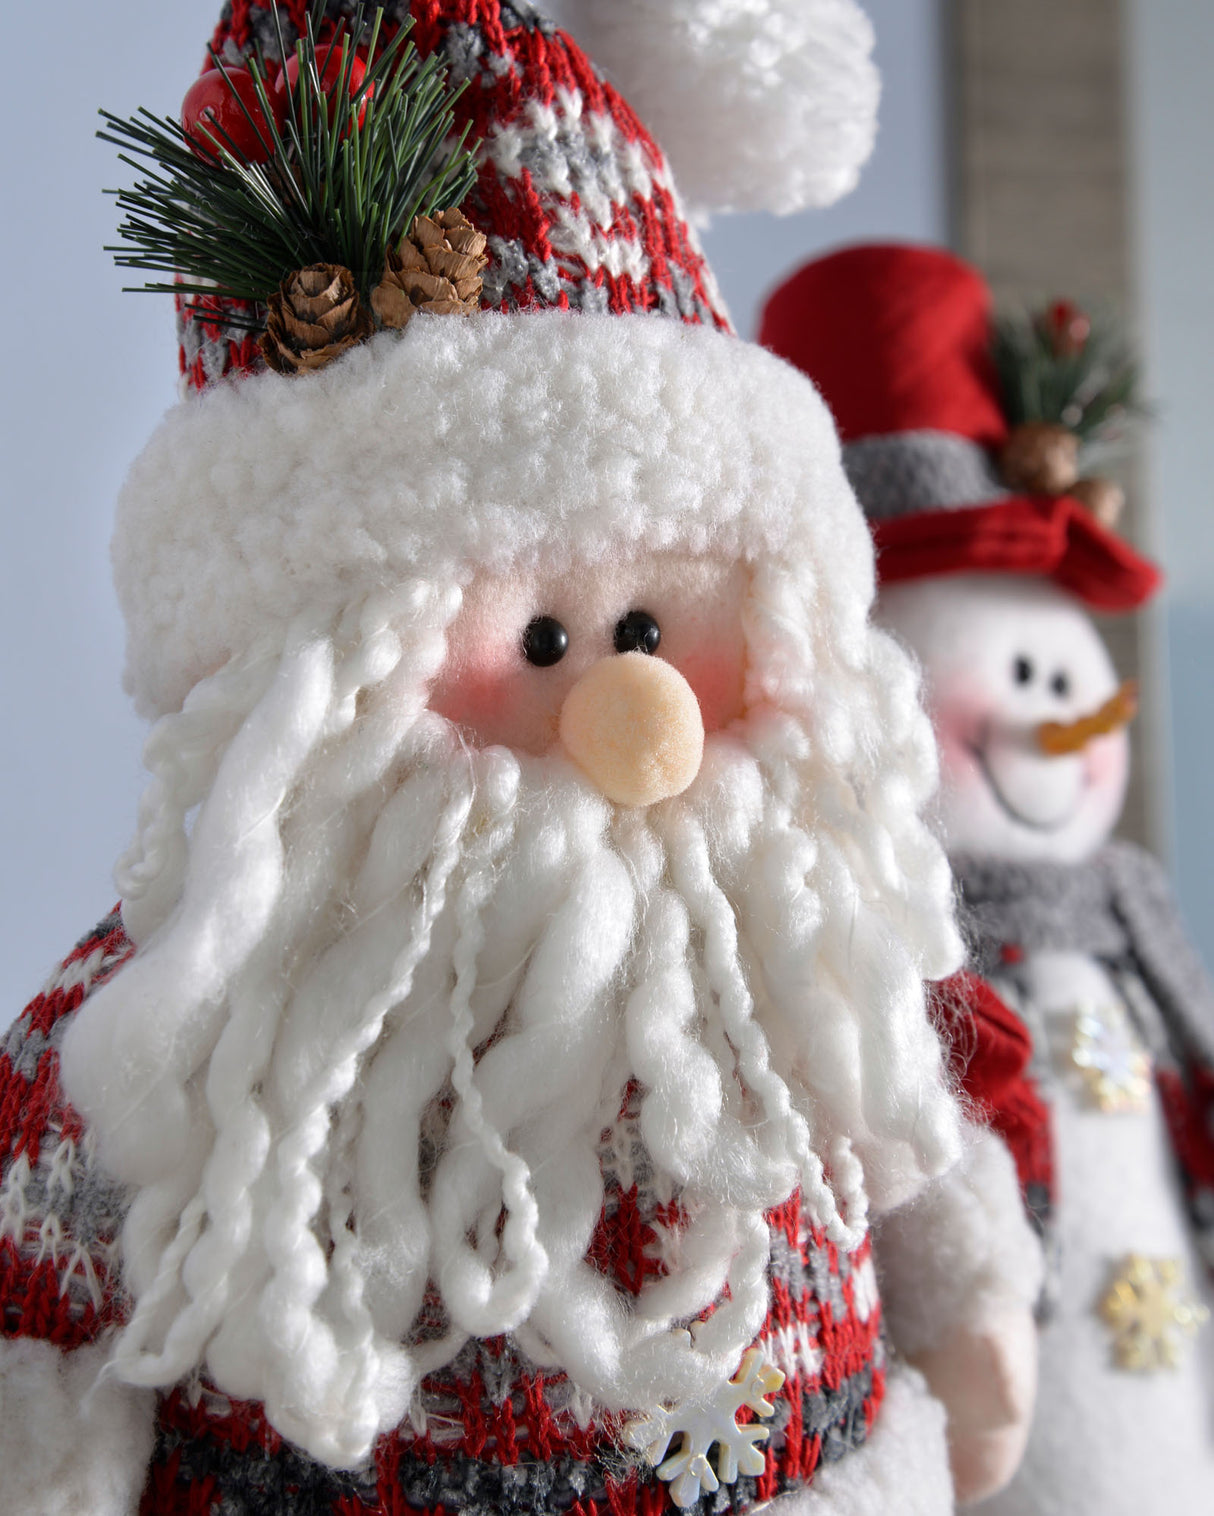 Set of 2 Santa and Snowman Figurines, Red/Grey, 25 cm